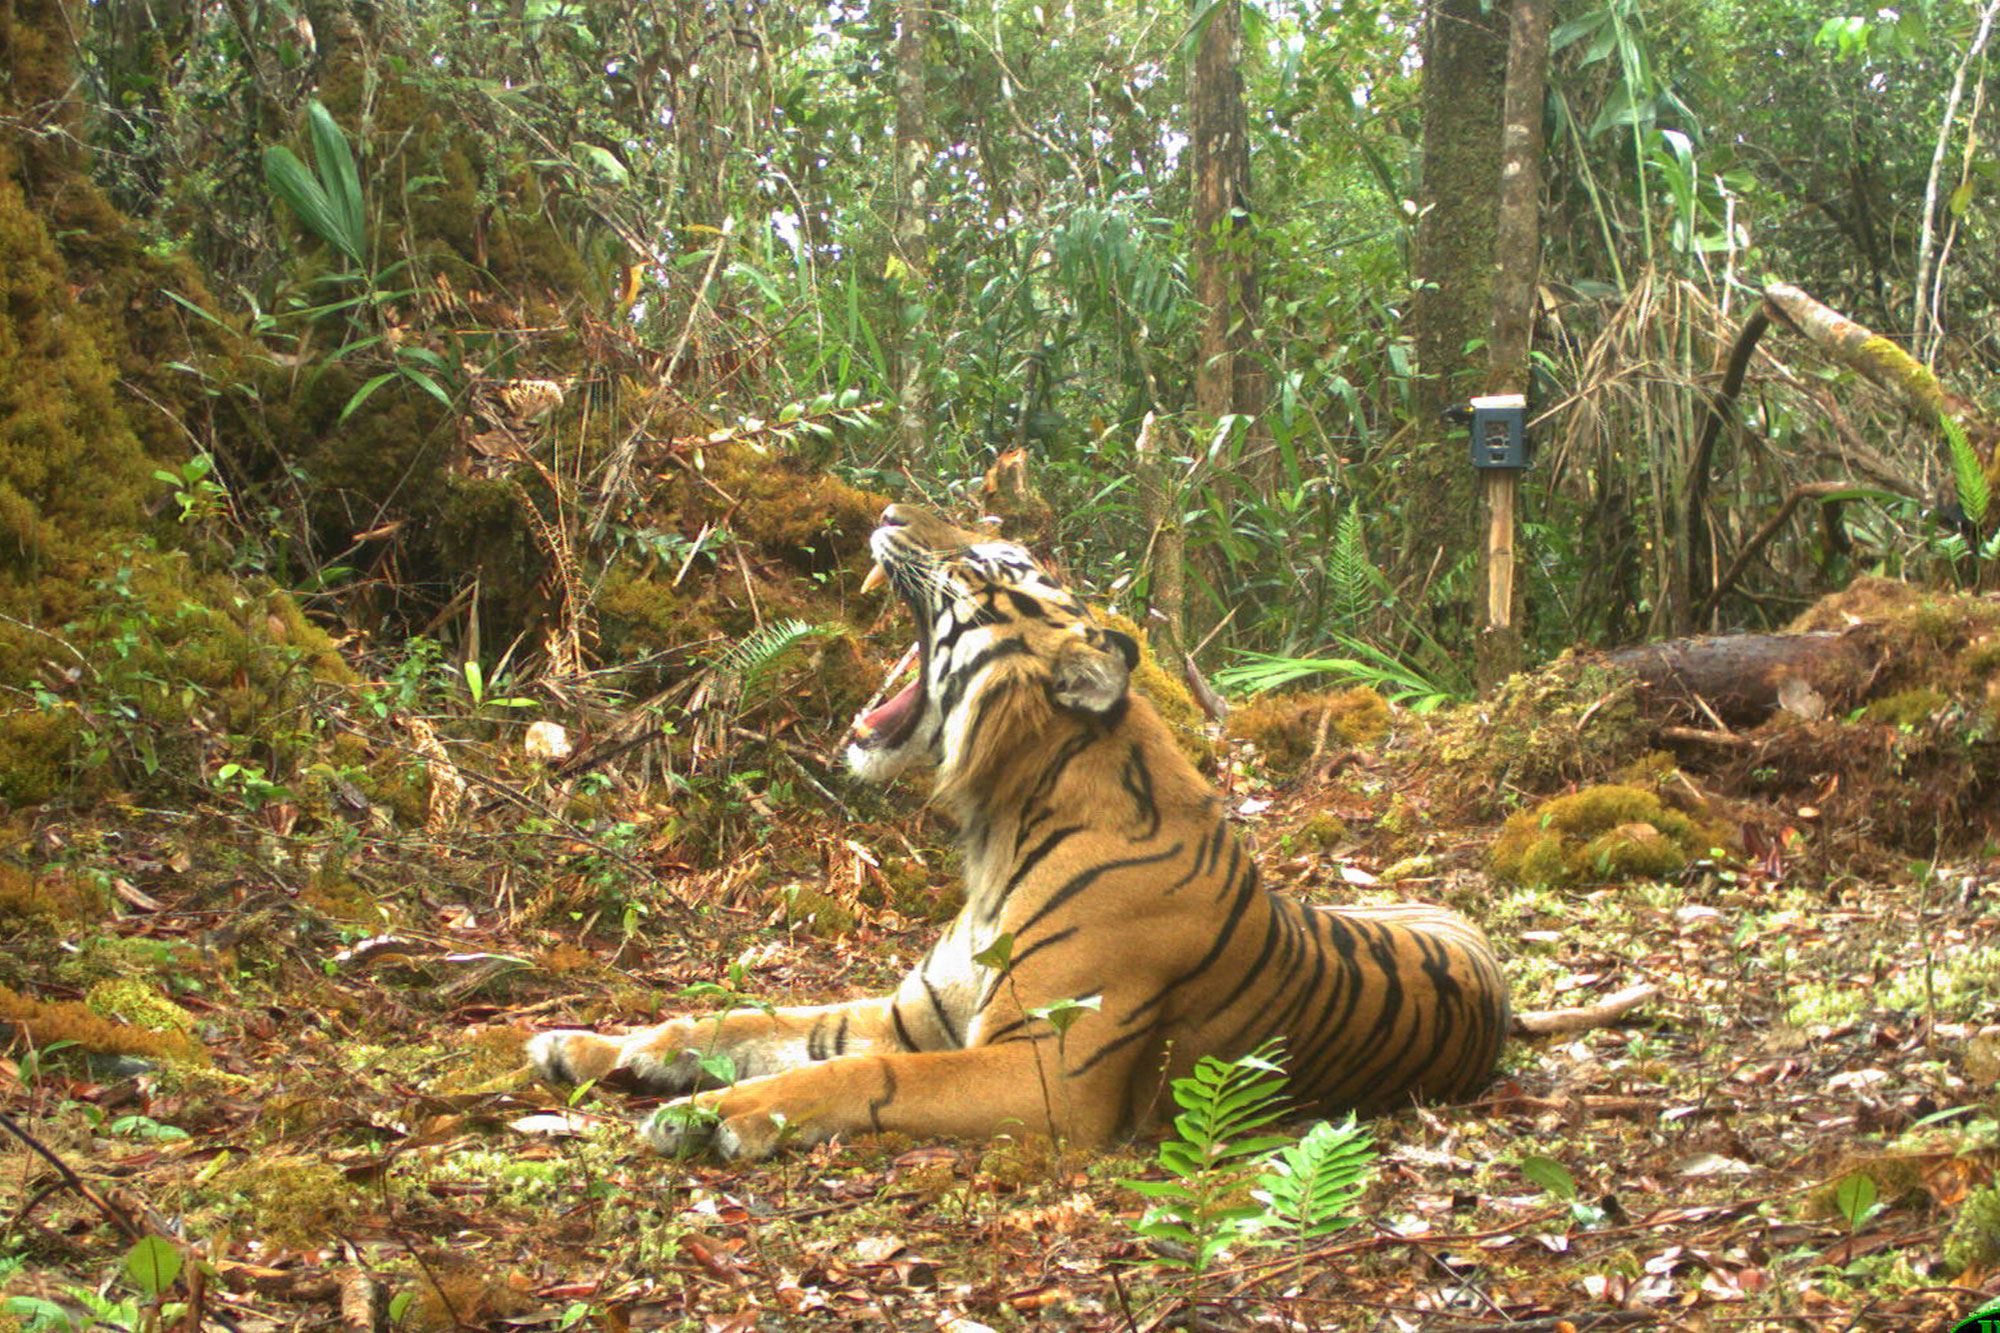 Tiger in the forest caught by camera trap